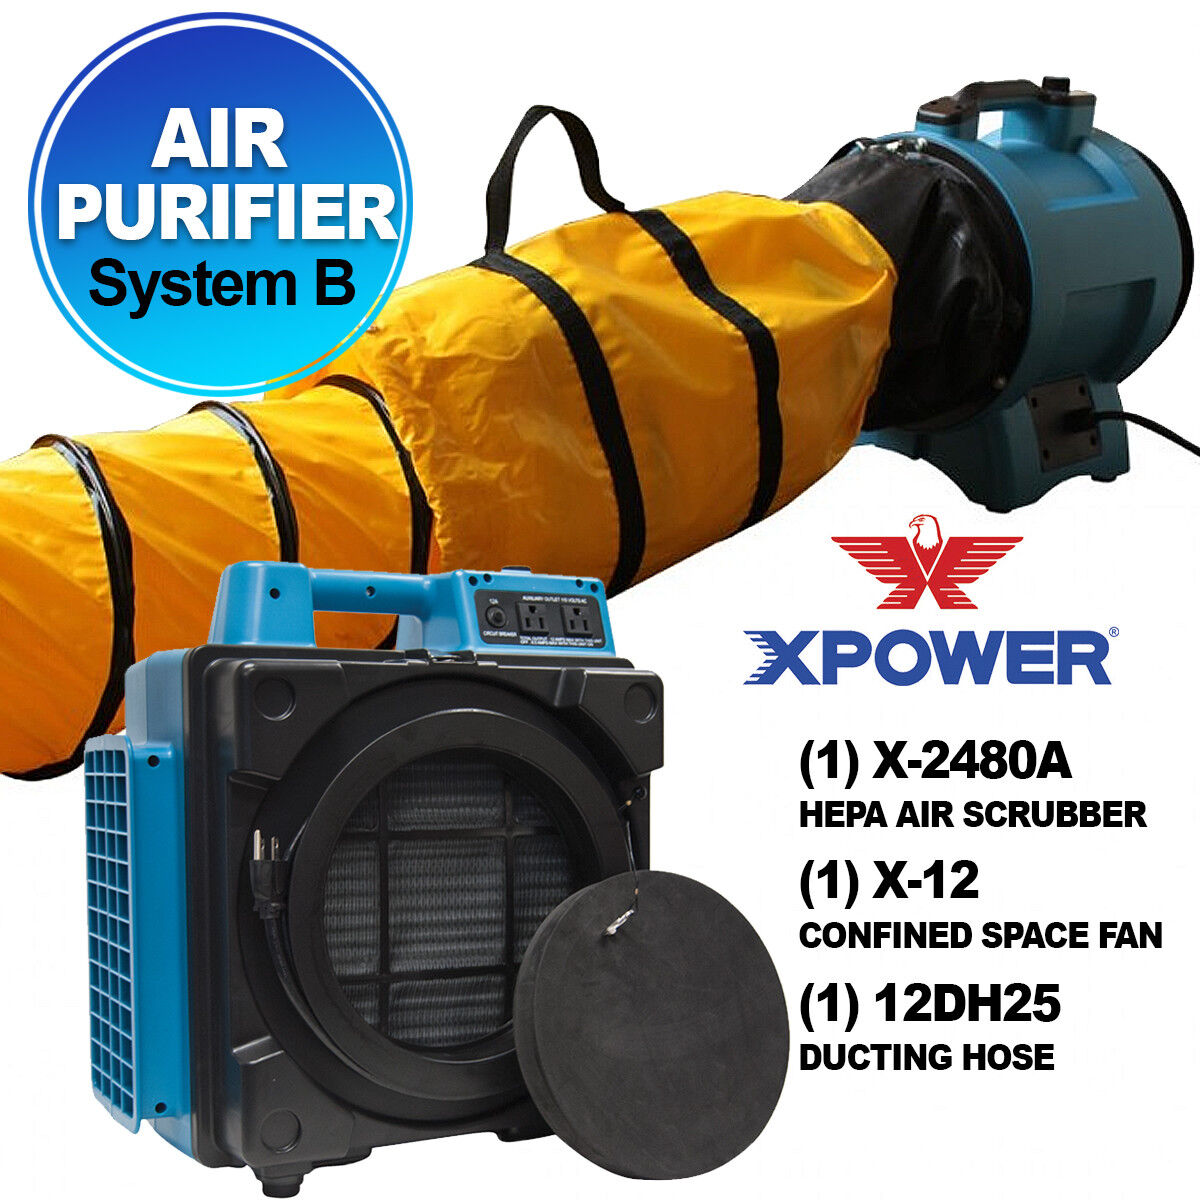 XPOWER X-2480A Pro Air Purifier System Hepa Air Scrubber for Fire Smoke